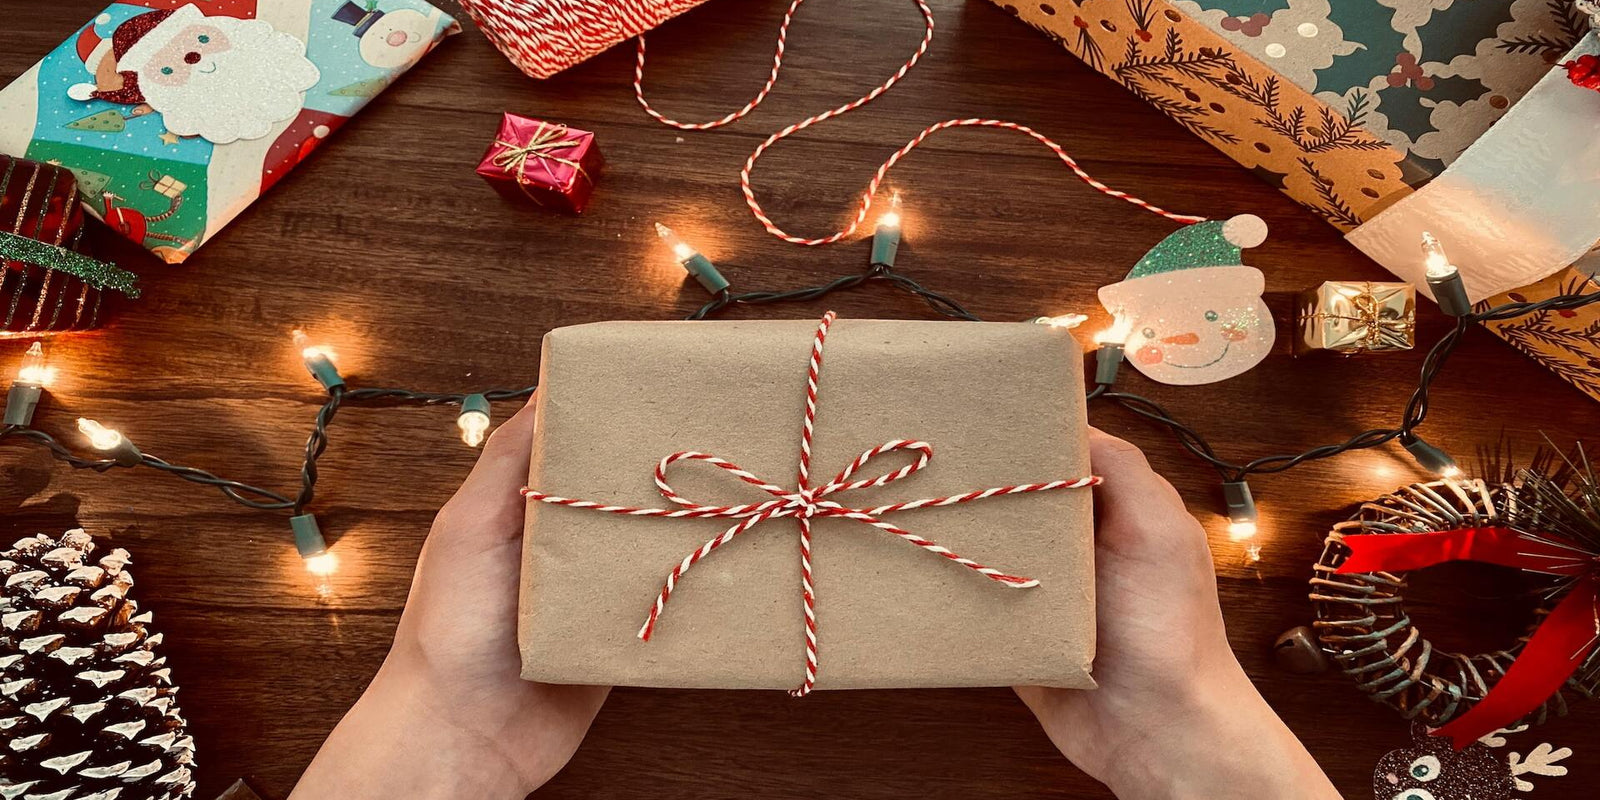 Best Wooden Gifts Ideas for Christmas